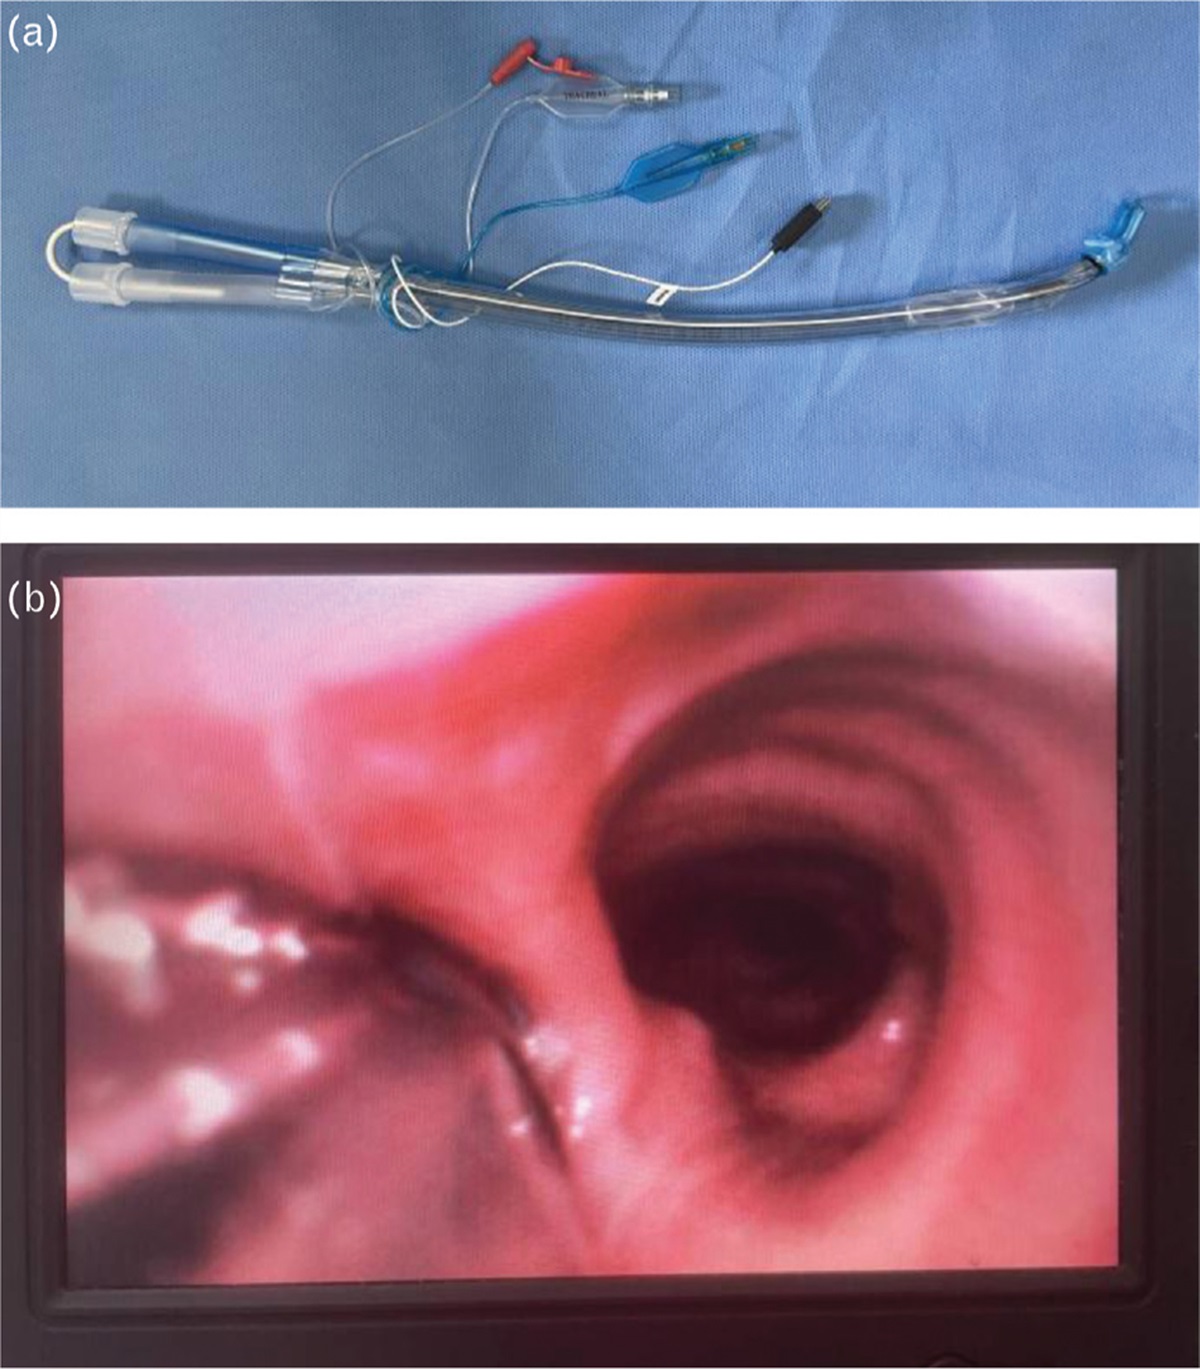 The effects of video double-lumen tubes on intubation complications in patients undergoing thoracic surgery: A randomised controlled study